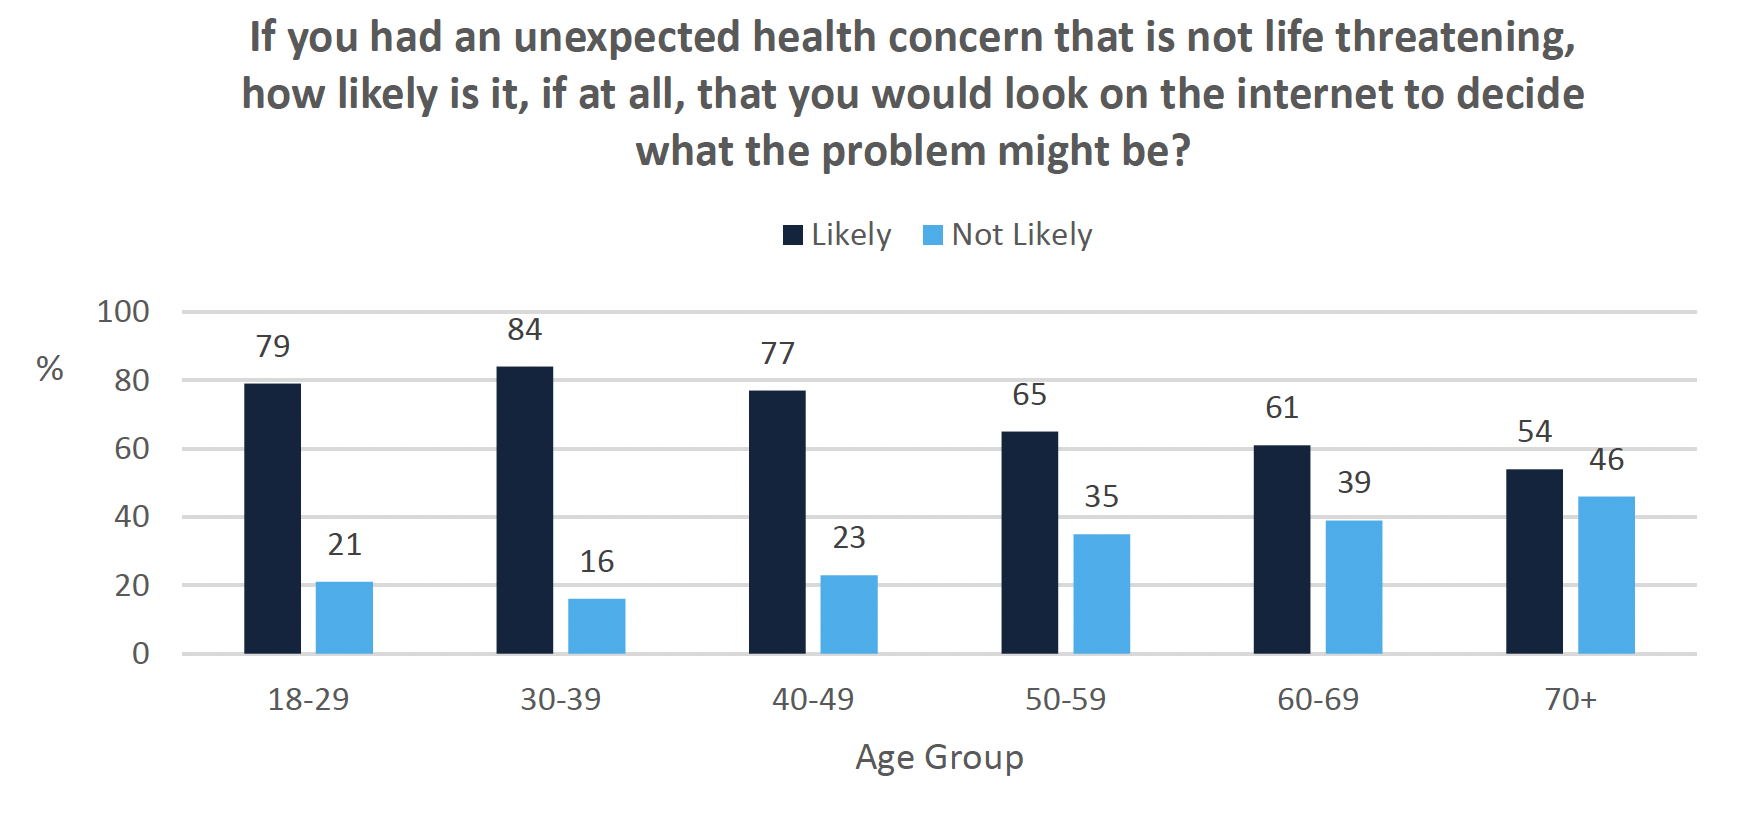 Vertical graph showing how likely people are to look on the internet for health problems, by age group
This vertical graph shows the likelihood of using the internet to decide what a health problem might be for different ages groups. The findings show that younger age groups (18-49) are more likely to use the internet to decide what a medical issue may be and the older age groups are more likely to not use the internet for this purpose (50-70+).